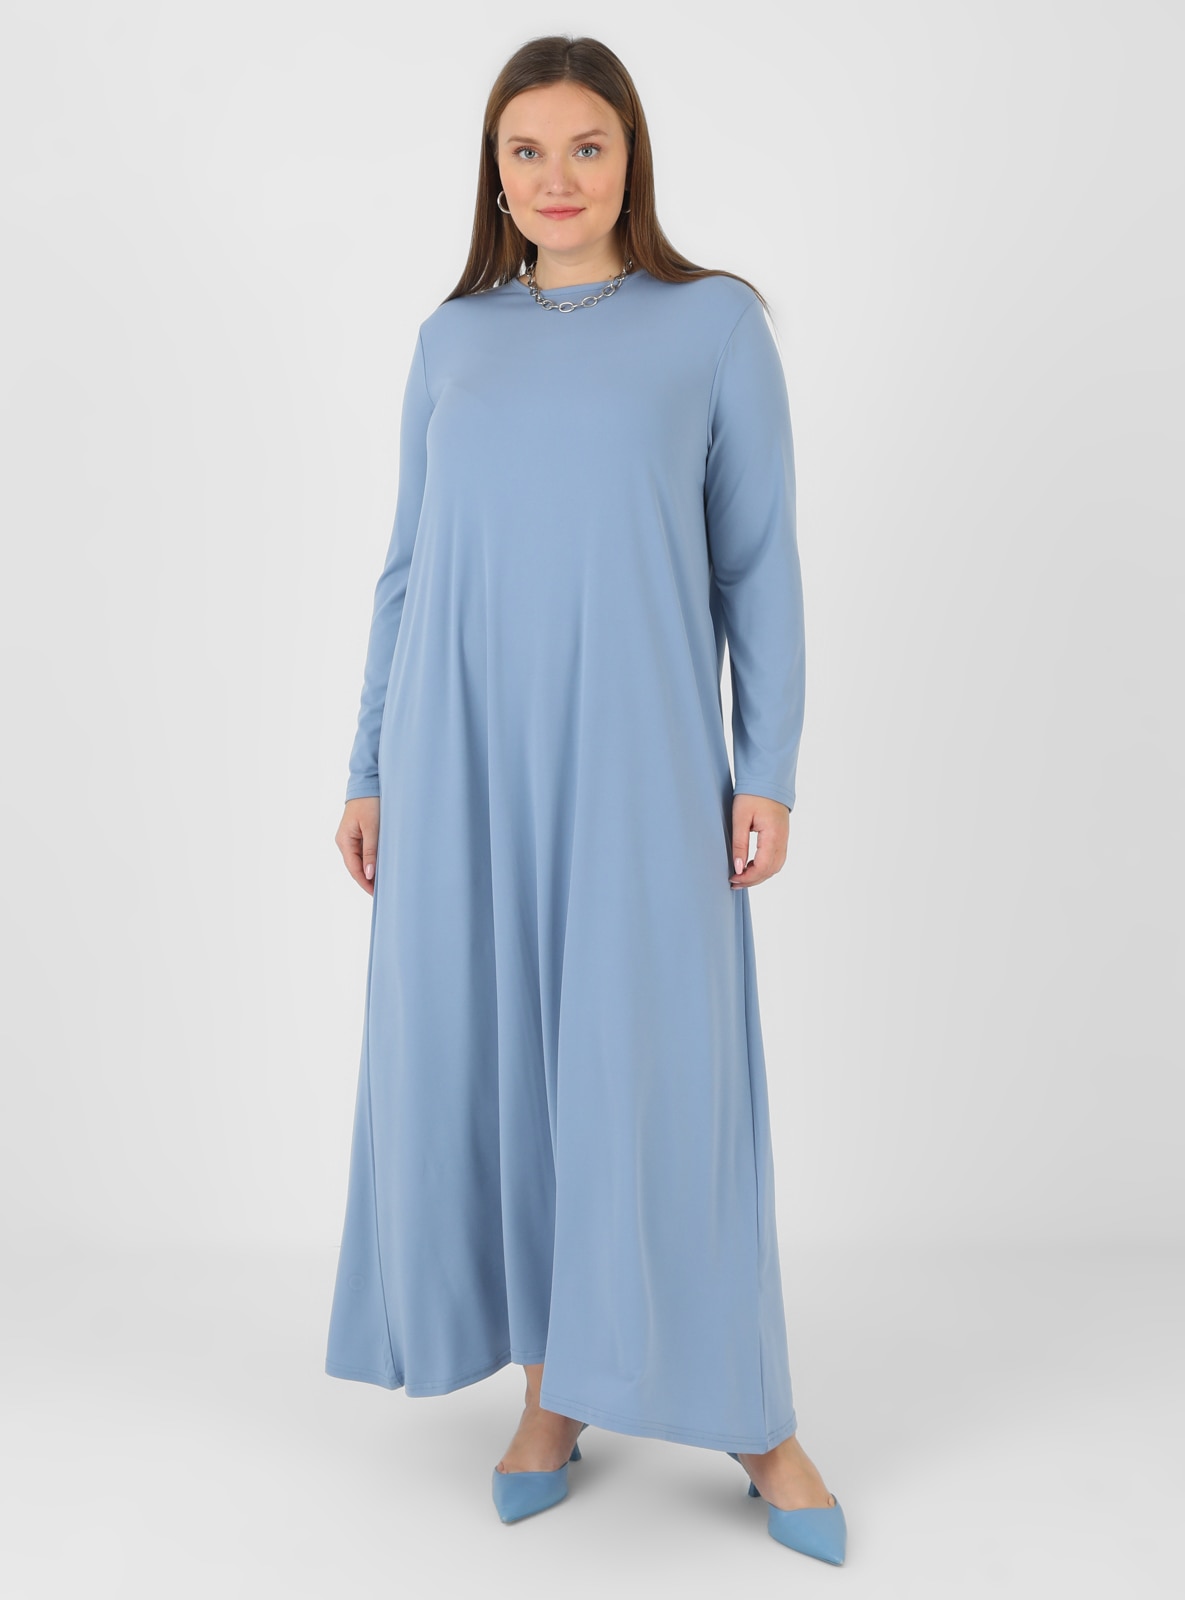 Icy Blue - Unlined - Crew neck - Plus Size Dress